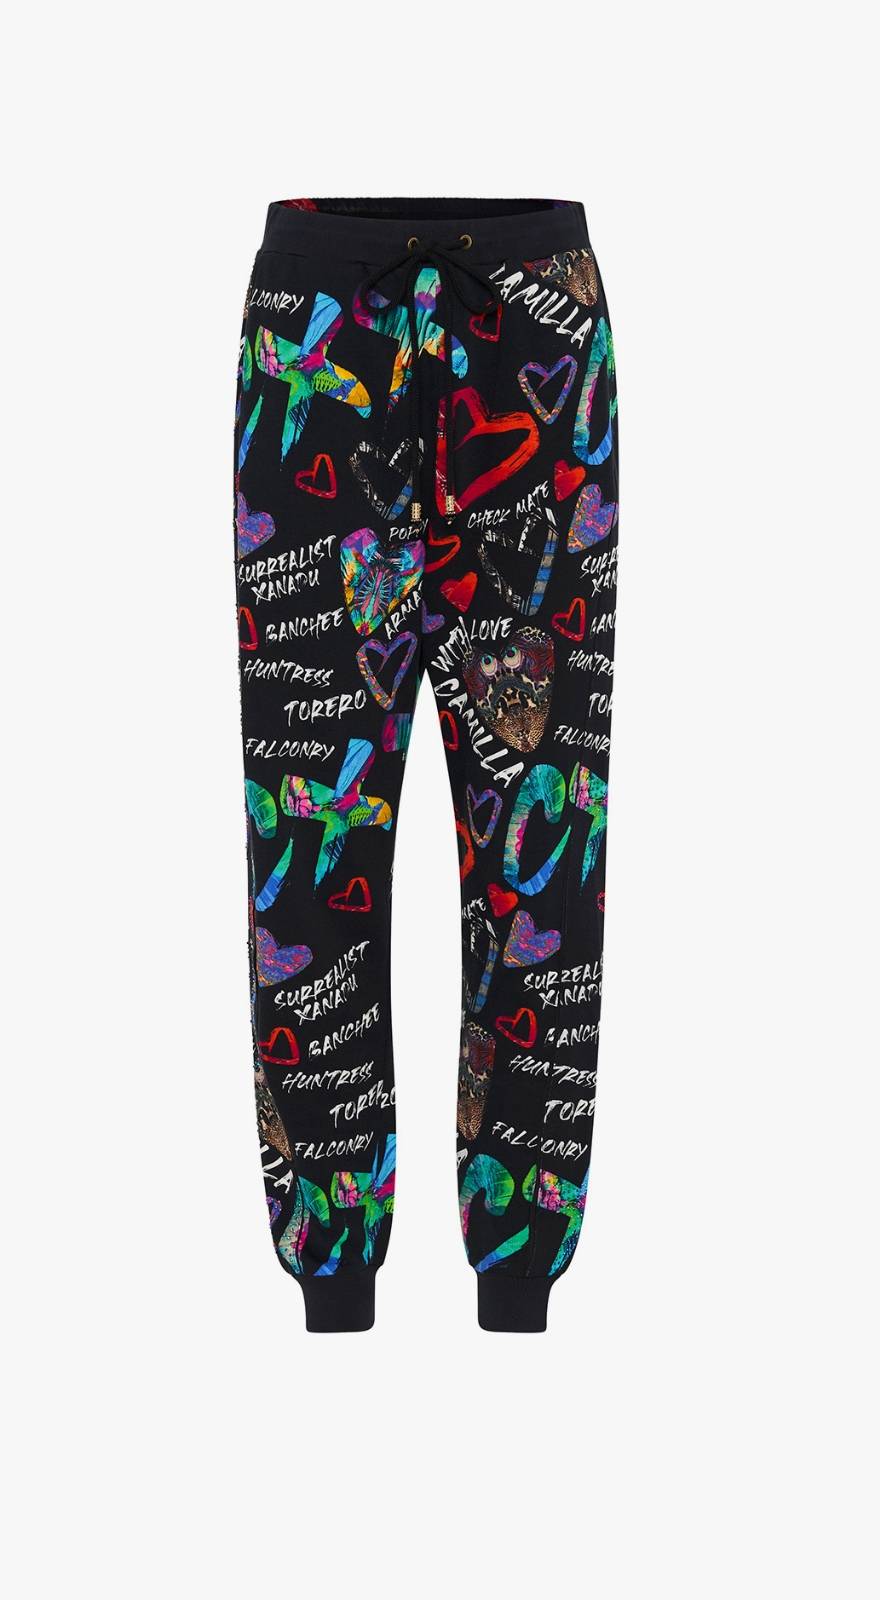 long black CAMILLA graphic printed pants on grey background